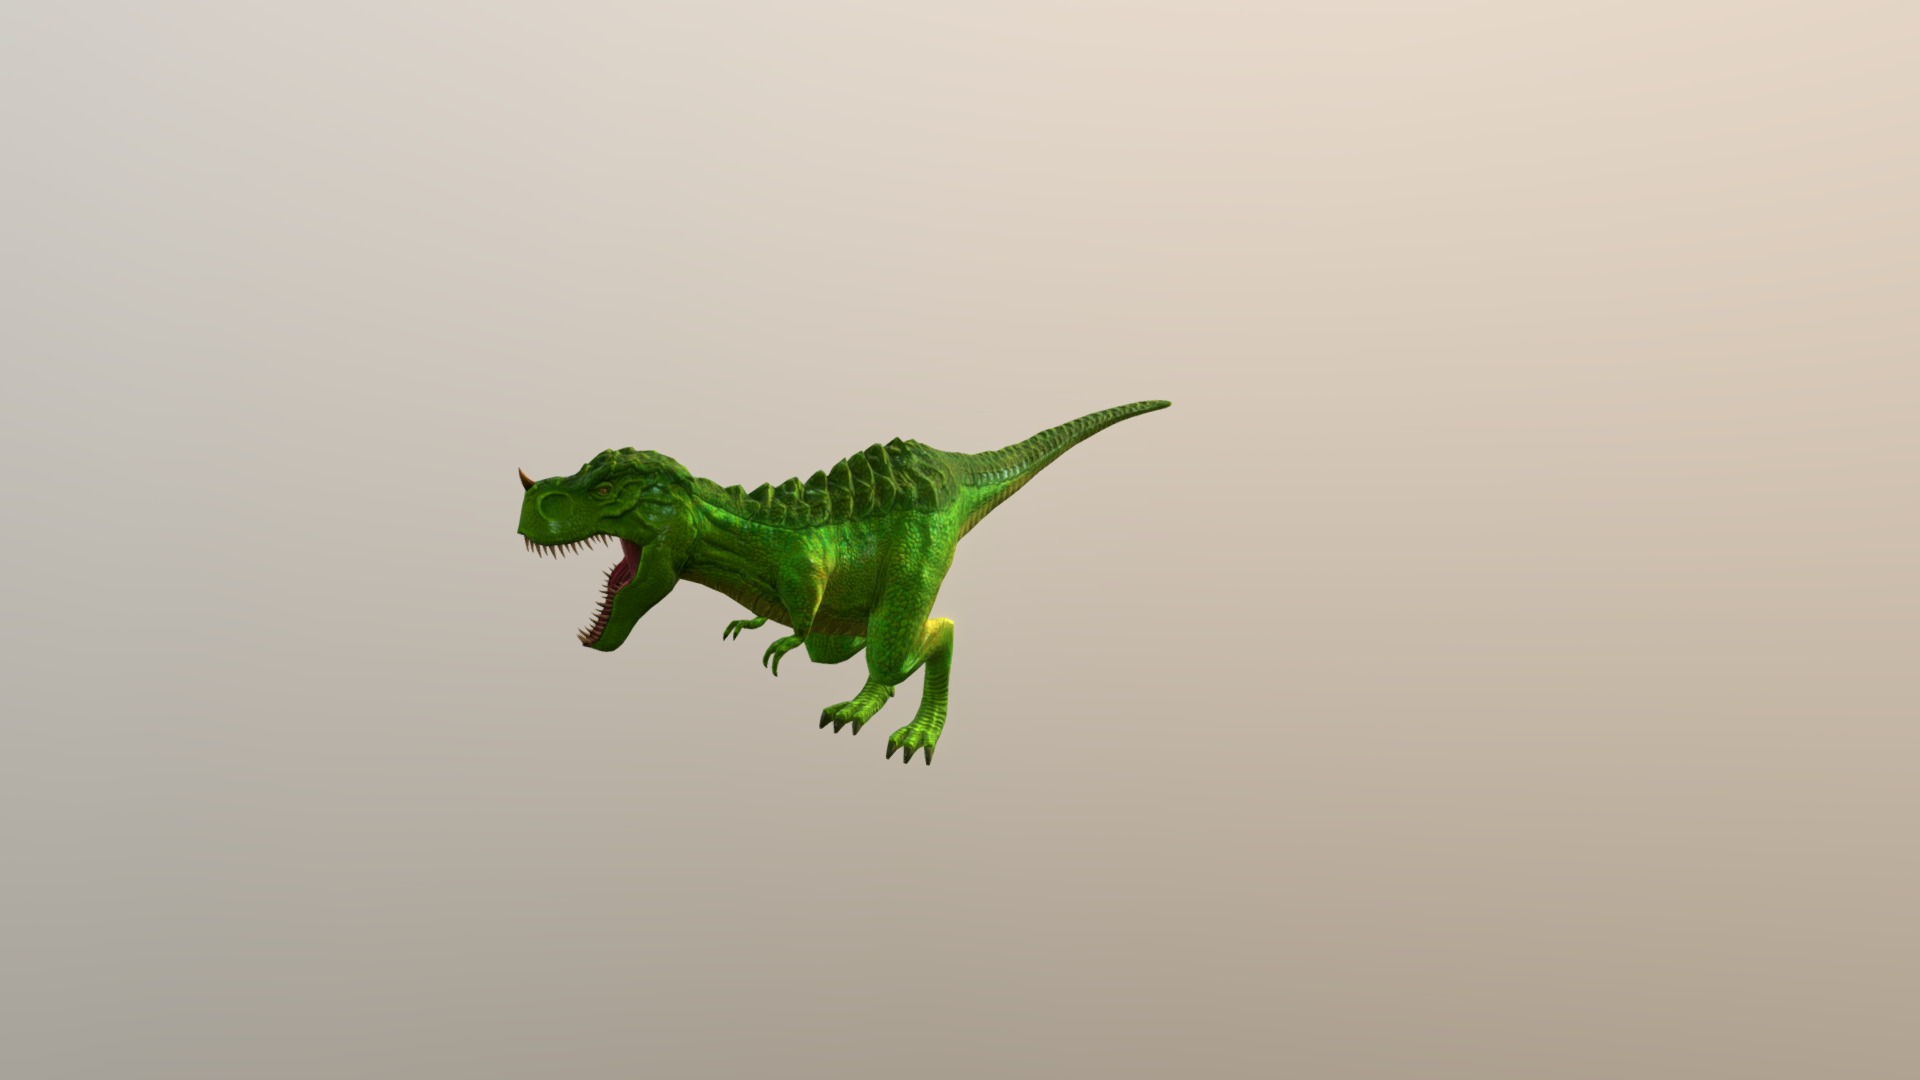 3D model 3D Foin- Tyranosaurus-rex - This is a 3D model of the 3D Foin- Tyranosaurus-rex. The 3D model is about a green lizard on a white background.